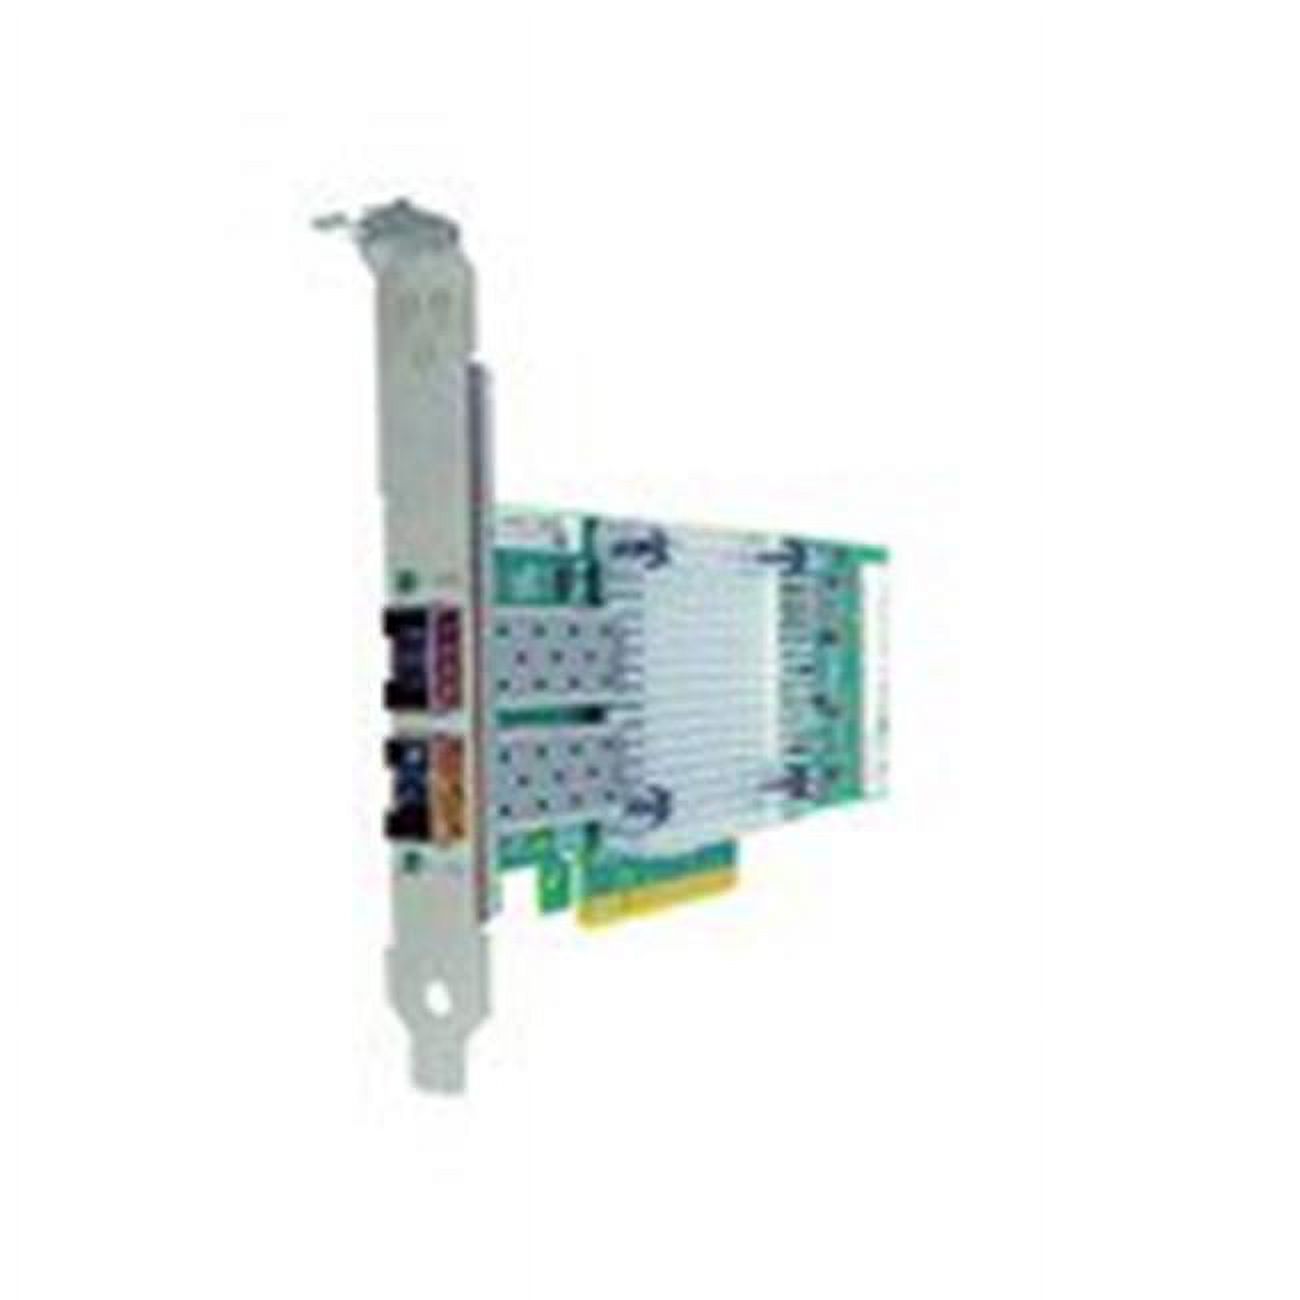 10GB Dual Port SFP Plus PCIe x8 NIC Card for Dell - image 1 of 1